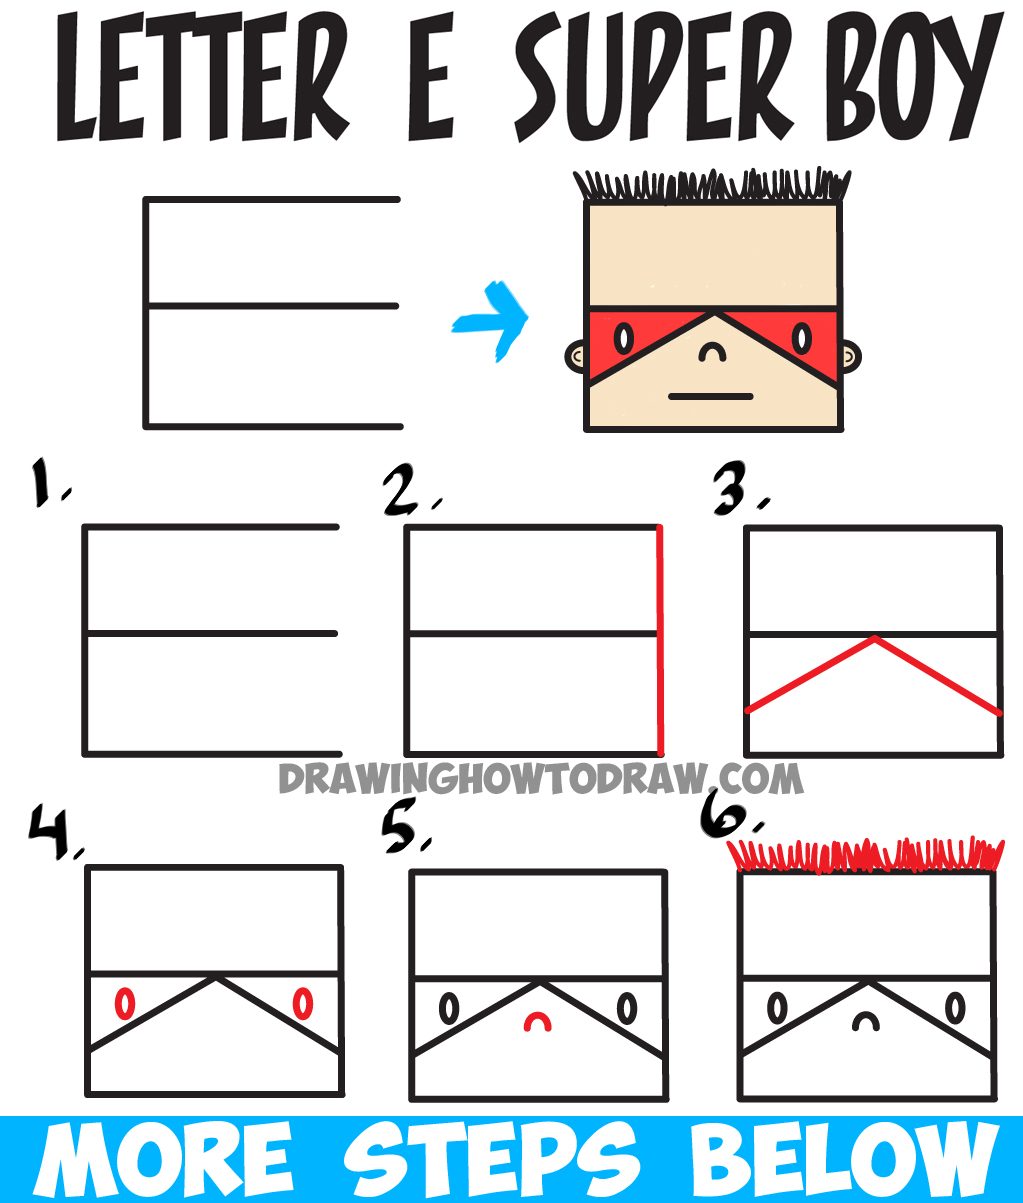 Learn How to Draw a Cartoon Superhero Boy from Letter E : Easy Step by Step Drawing Tutorial for Kids